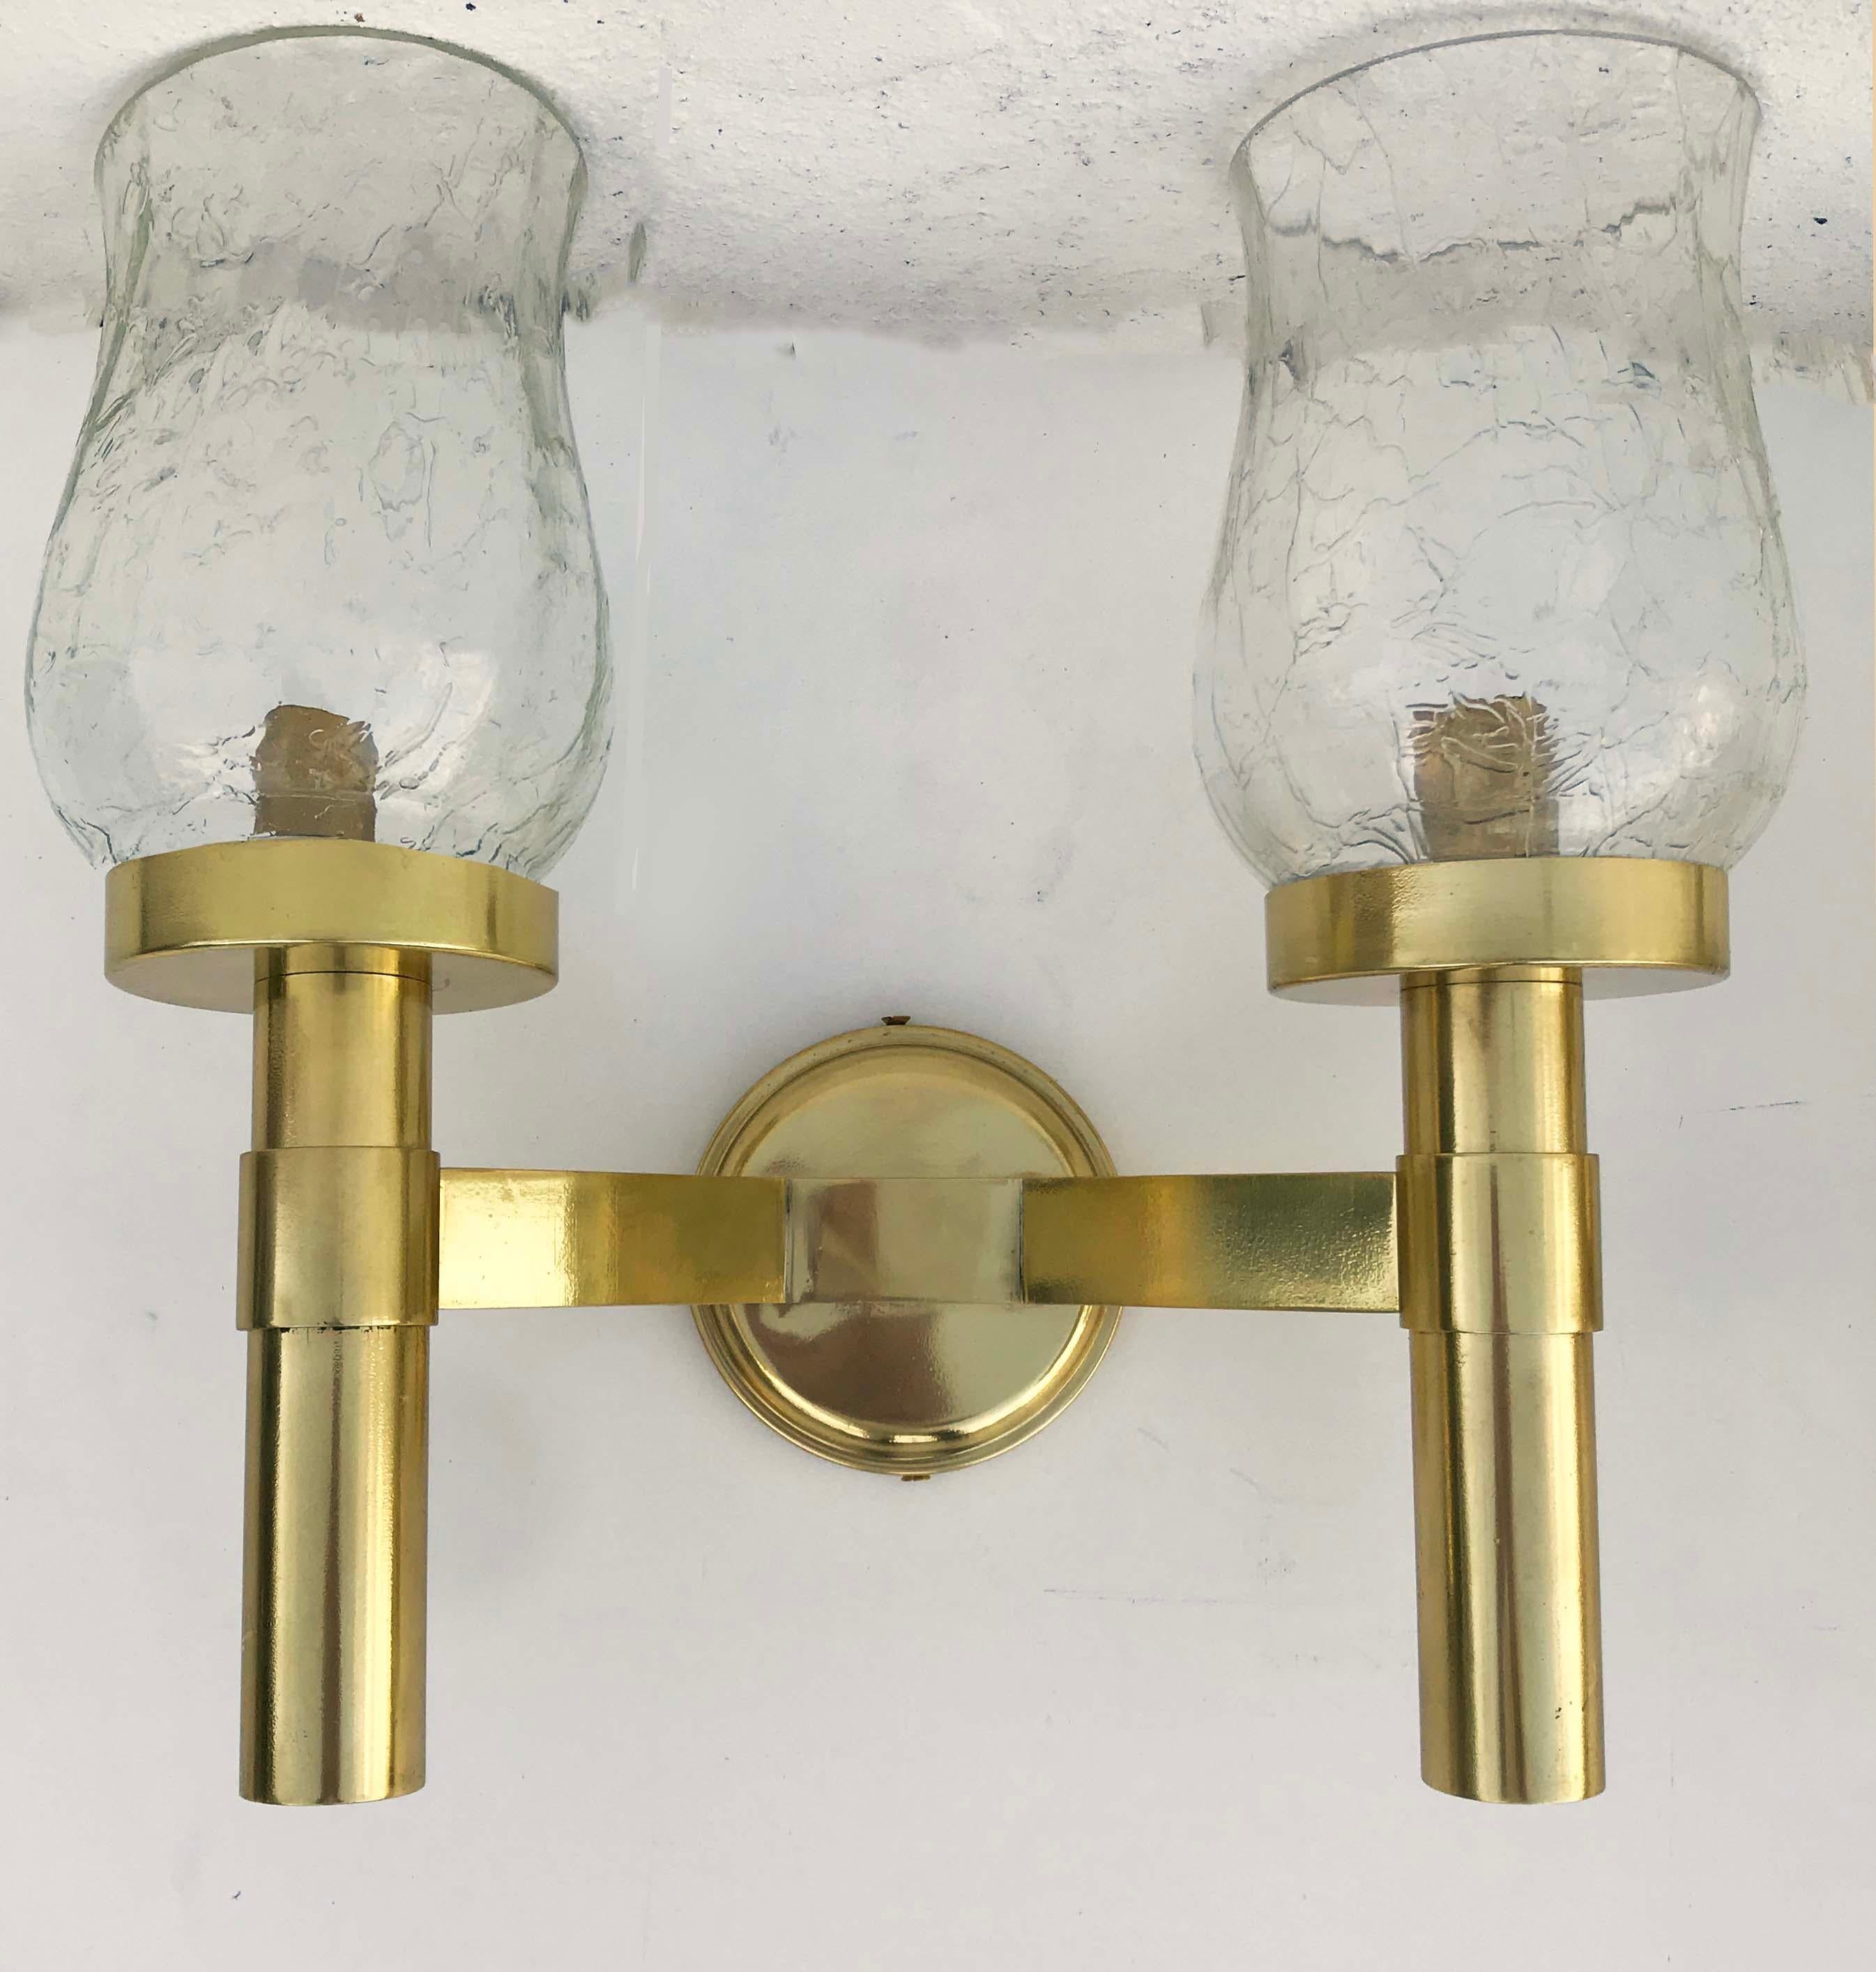 Superb pair of 2 lights sconces by Ateliers Perzel, brass and glass
Original Verrerie.
US rewired and in working condition 
Totally restored and refinished 
Back plate: 5